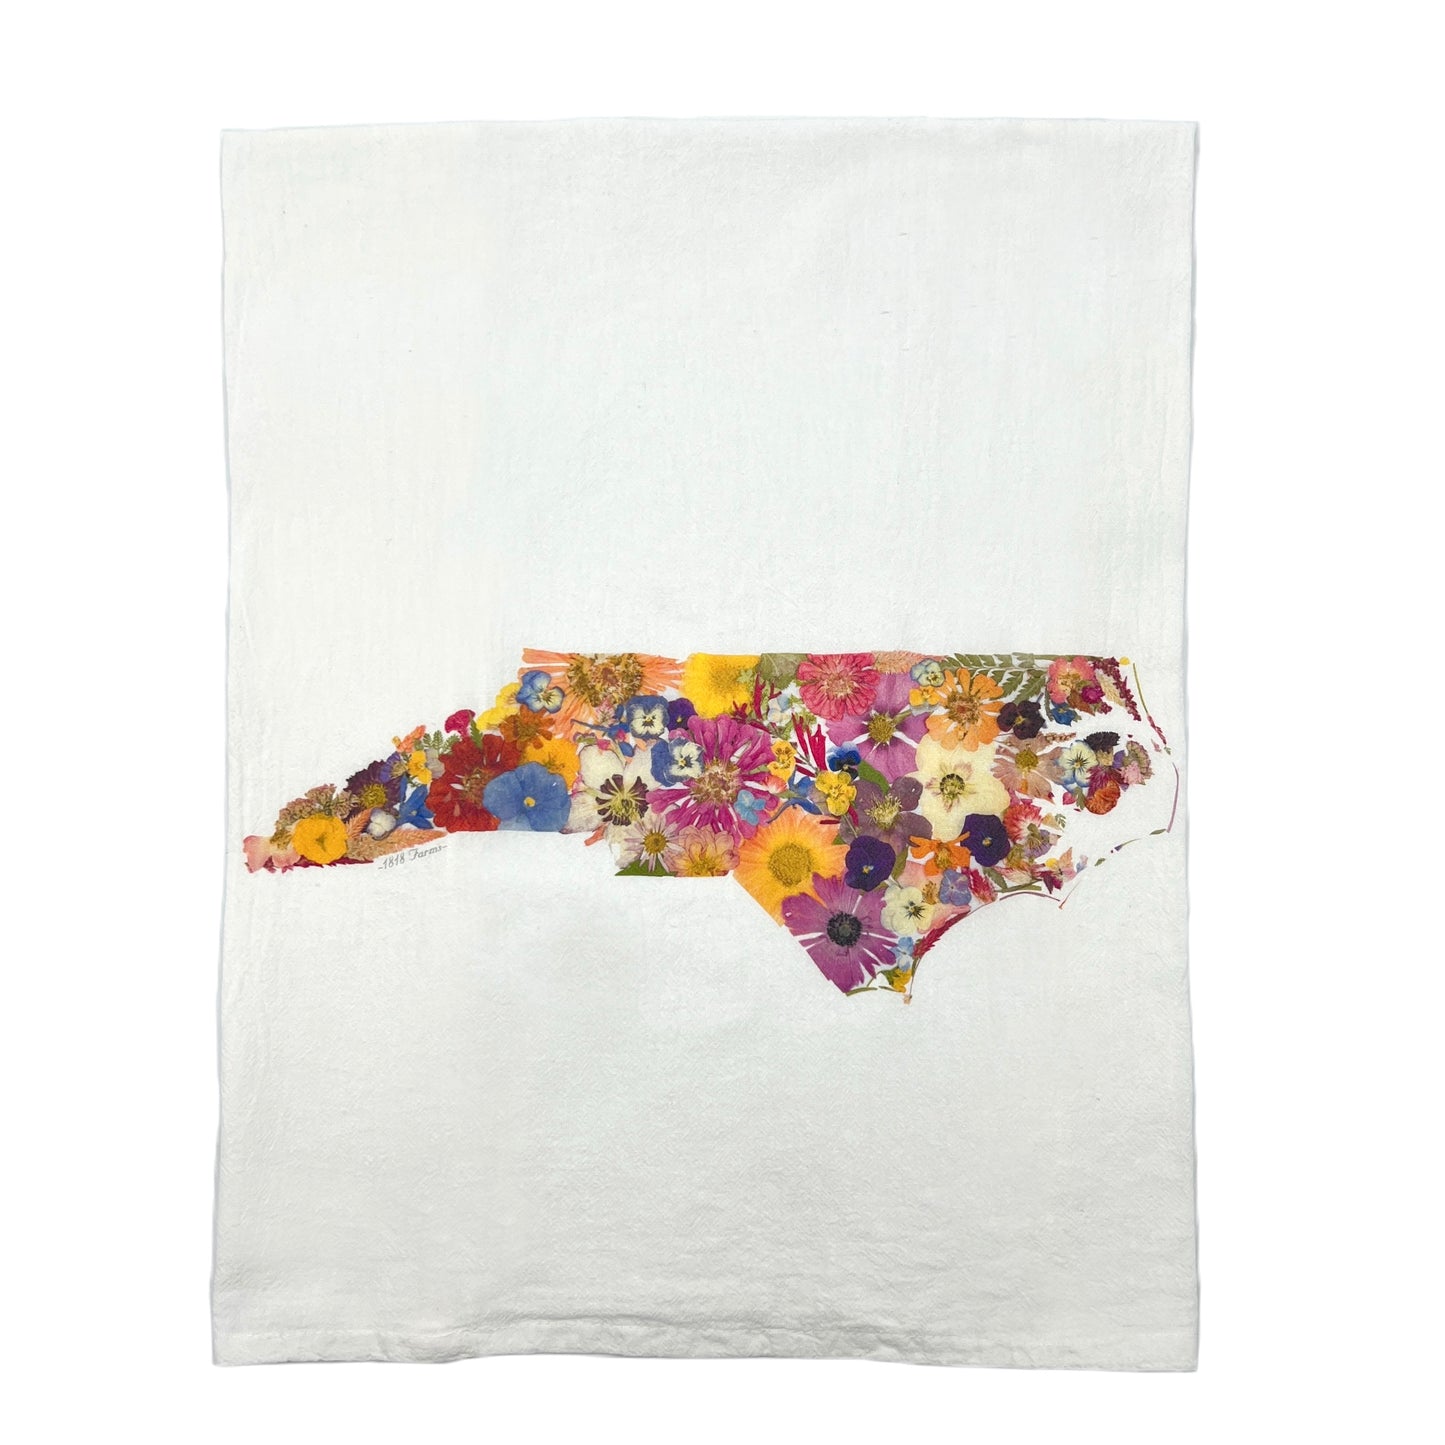 State Themed Flour Sack Towel Featuring Dried, Pressed Flowers - "Where I Bloom" Collection Towel 1818 Farms North Carolina  